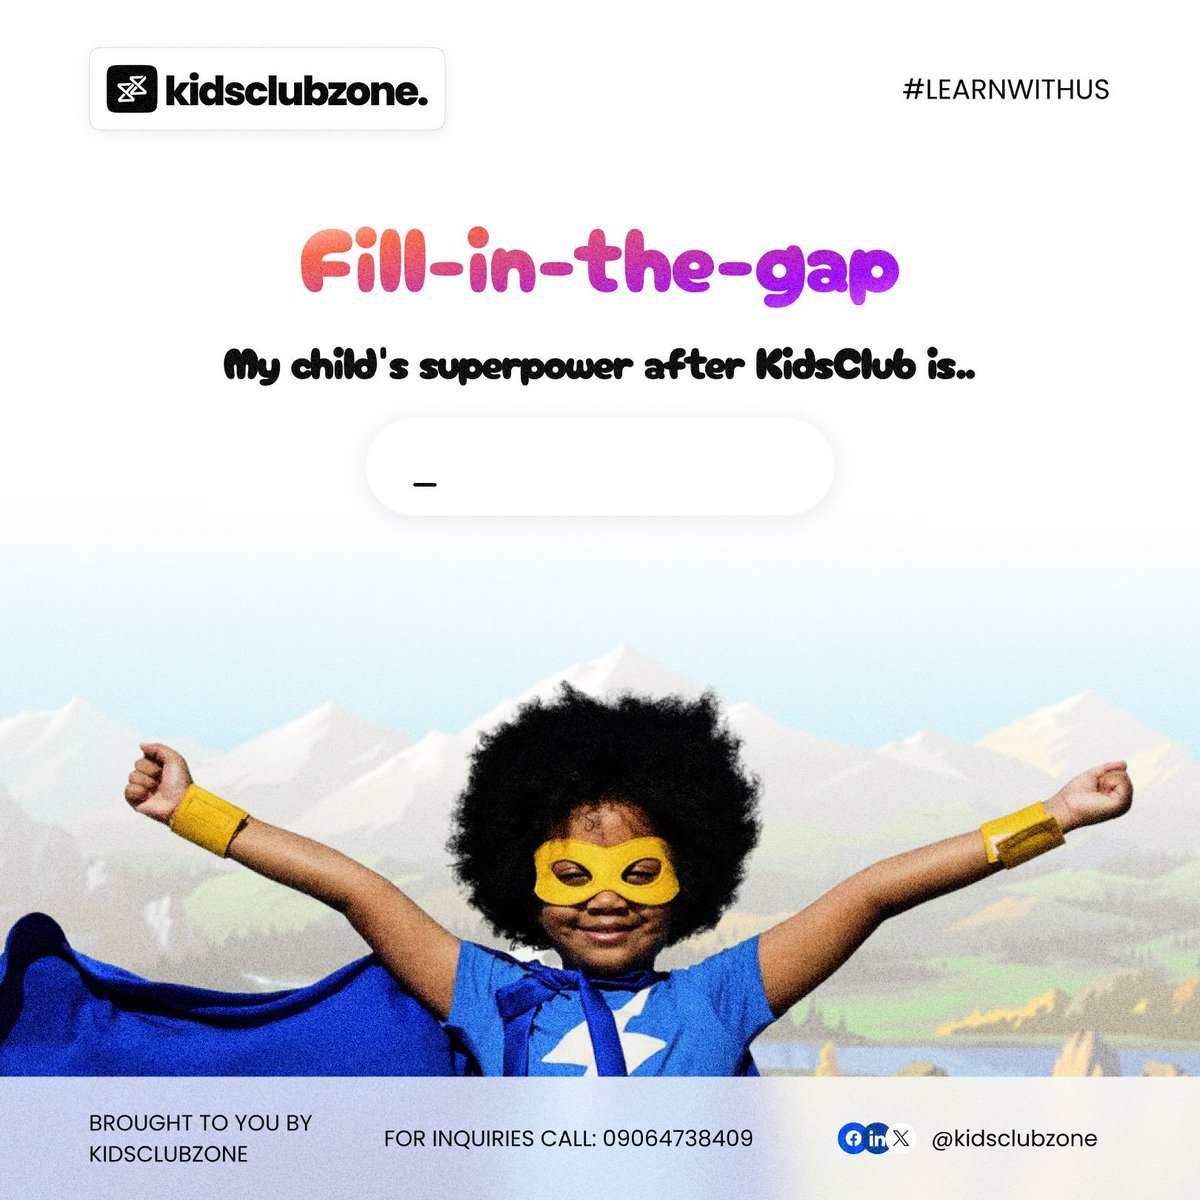 Every child enrolled at KidsClub is a superhero, with a super power.

KidsClub is here to unleash the superpower in your child. 

What's your child's superpower after enrolling them at KidsClub? 

Let us know in the comments 👇🏽